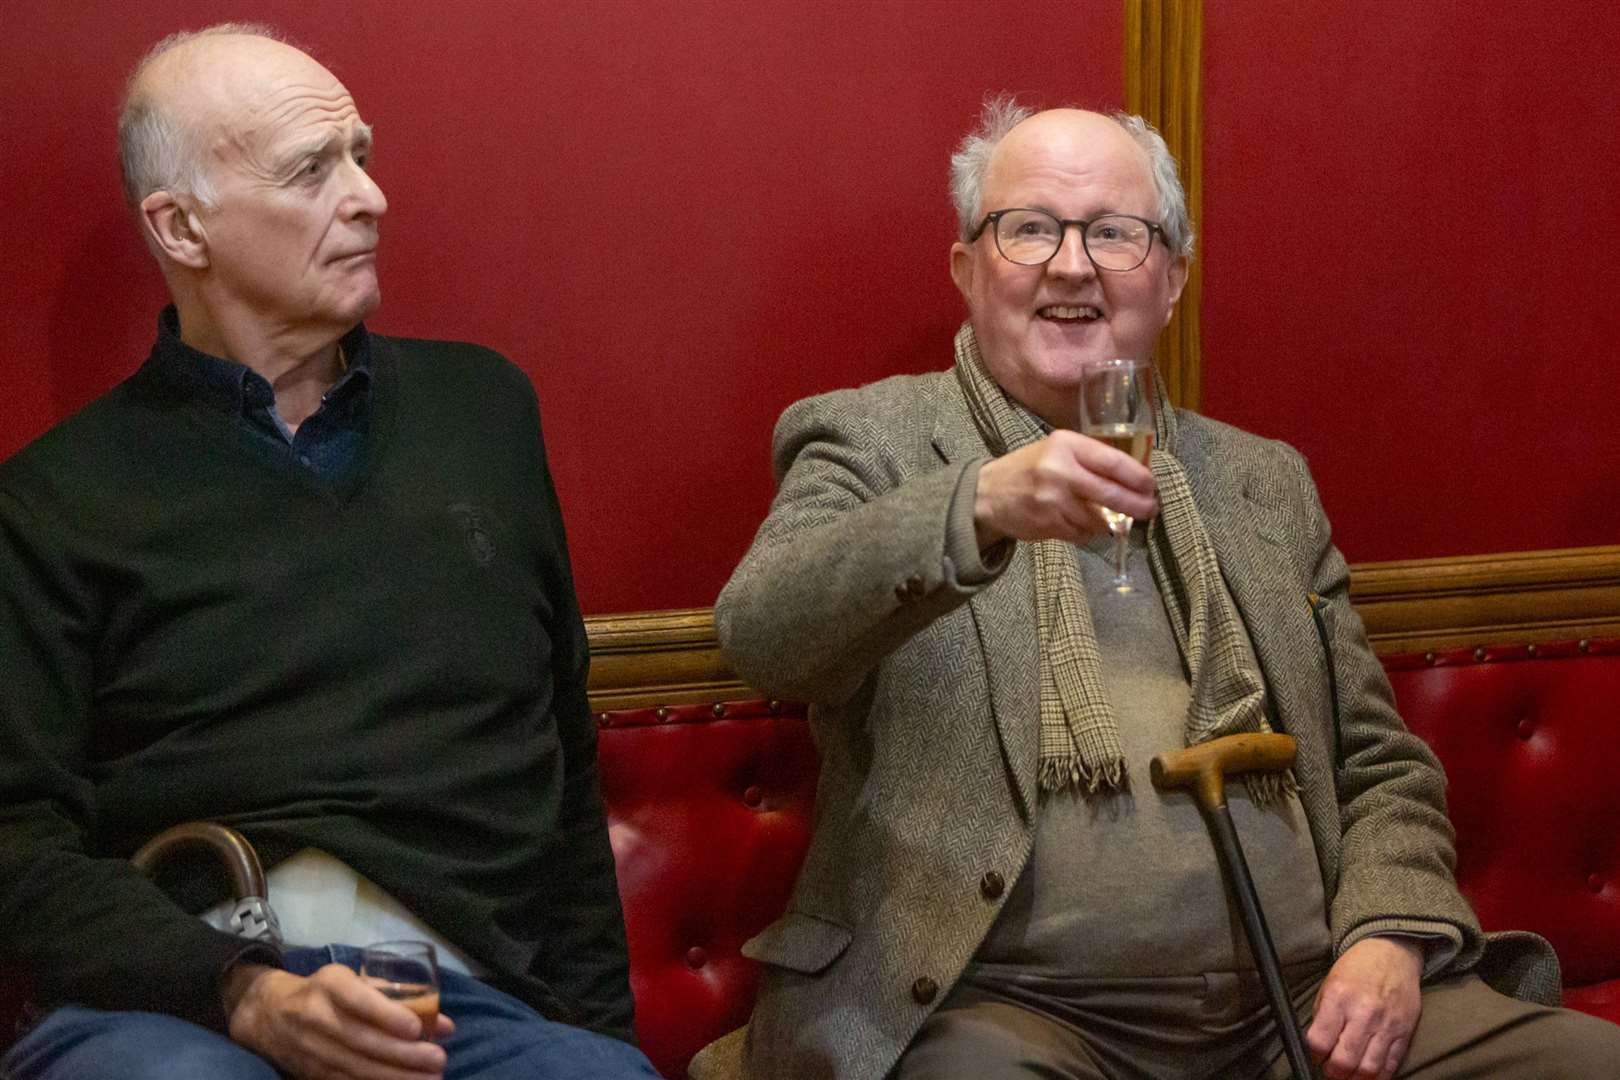 Bob Watson and John Sutherland toasting the new additions in the Tolbooth Courtroom.